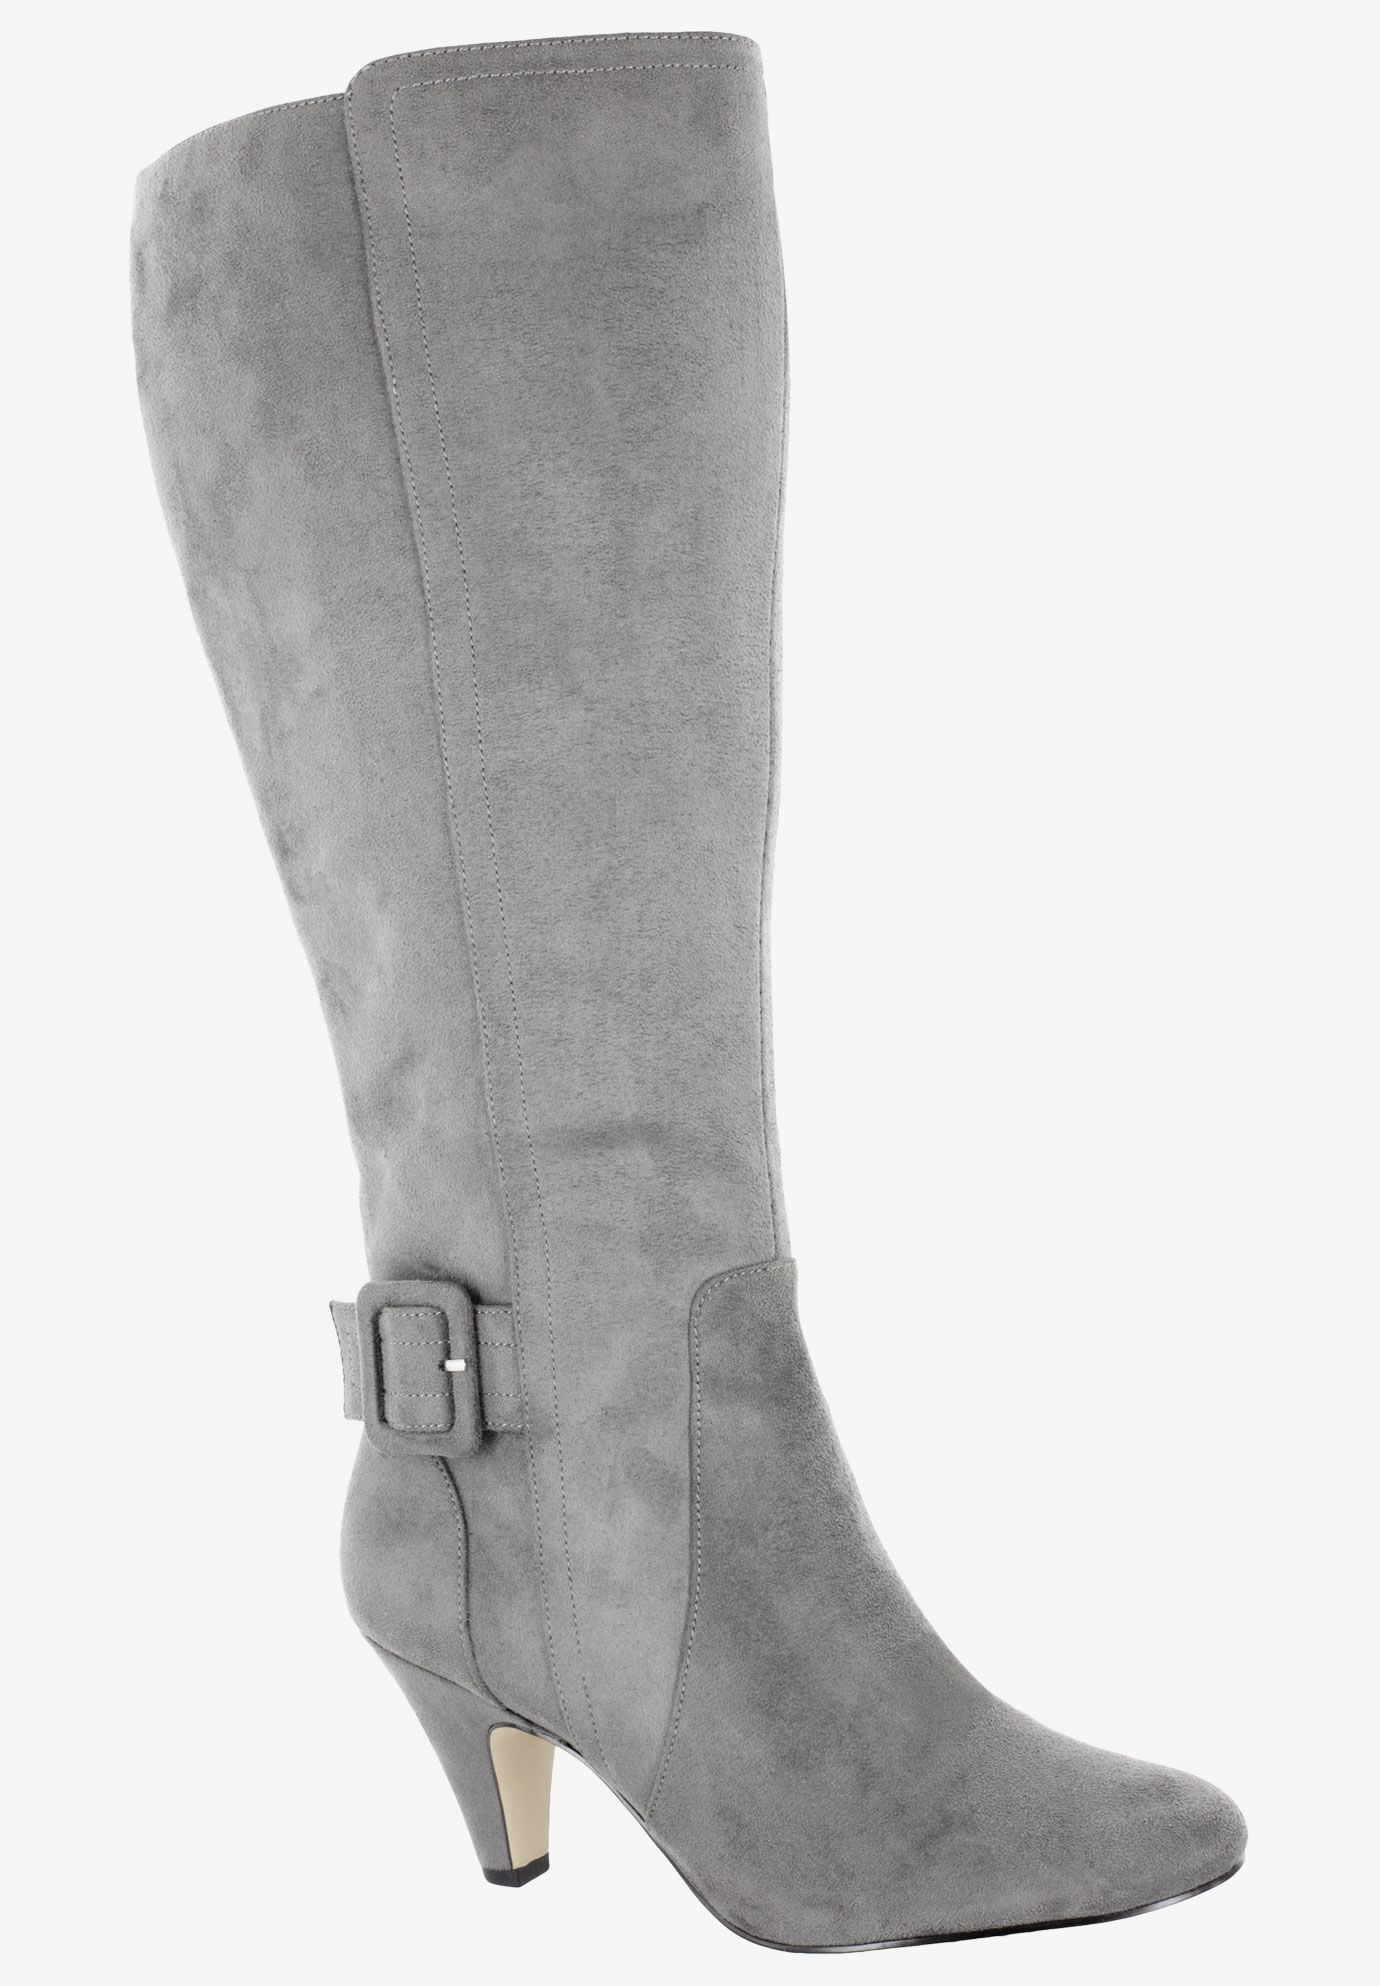 plus size leather boots wide calf